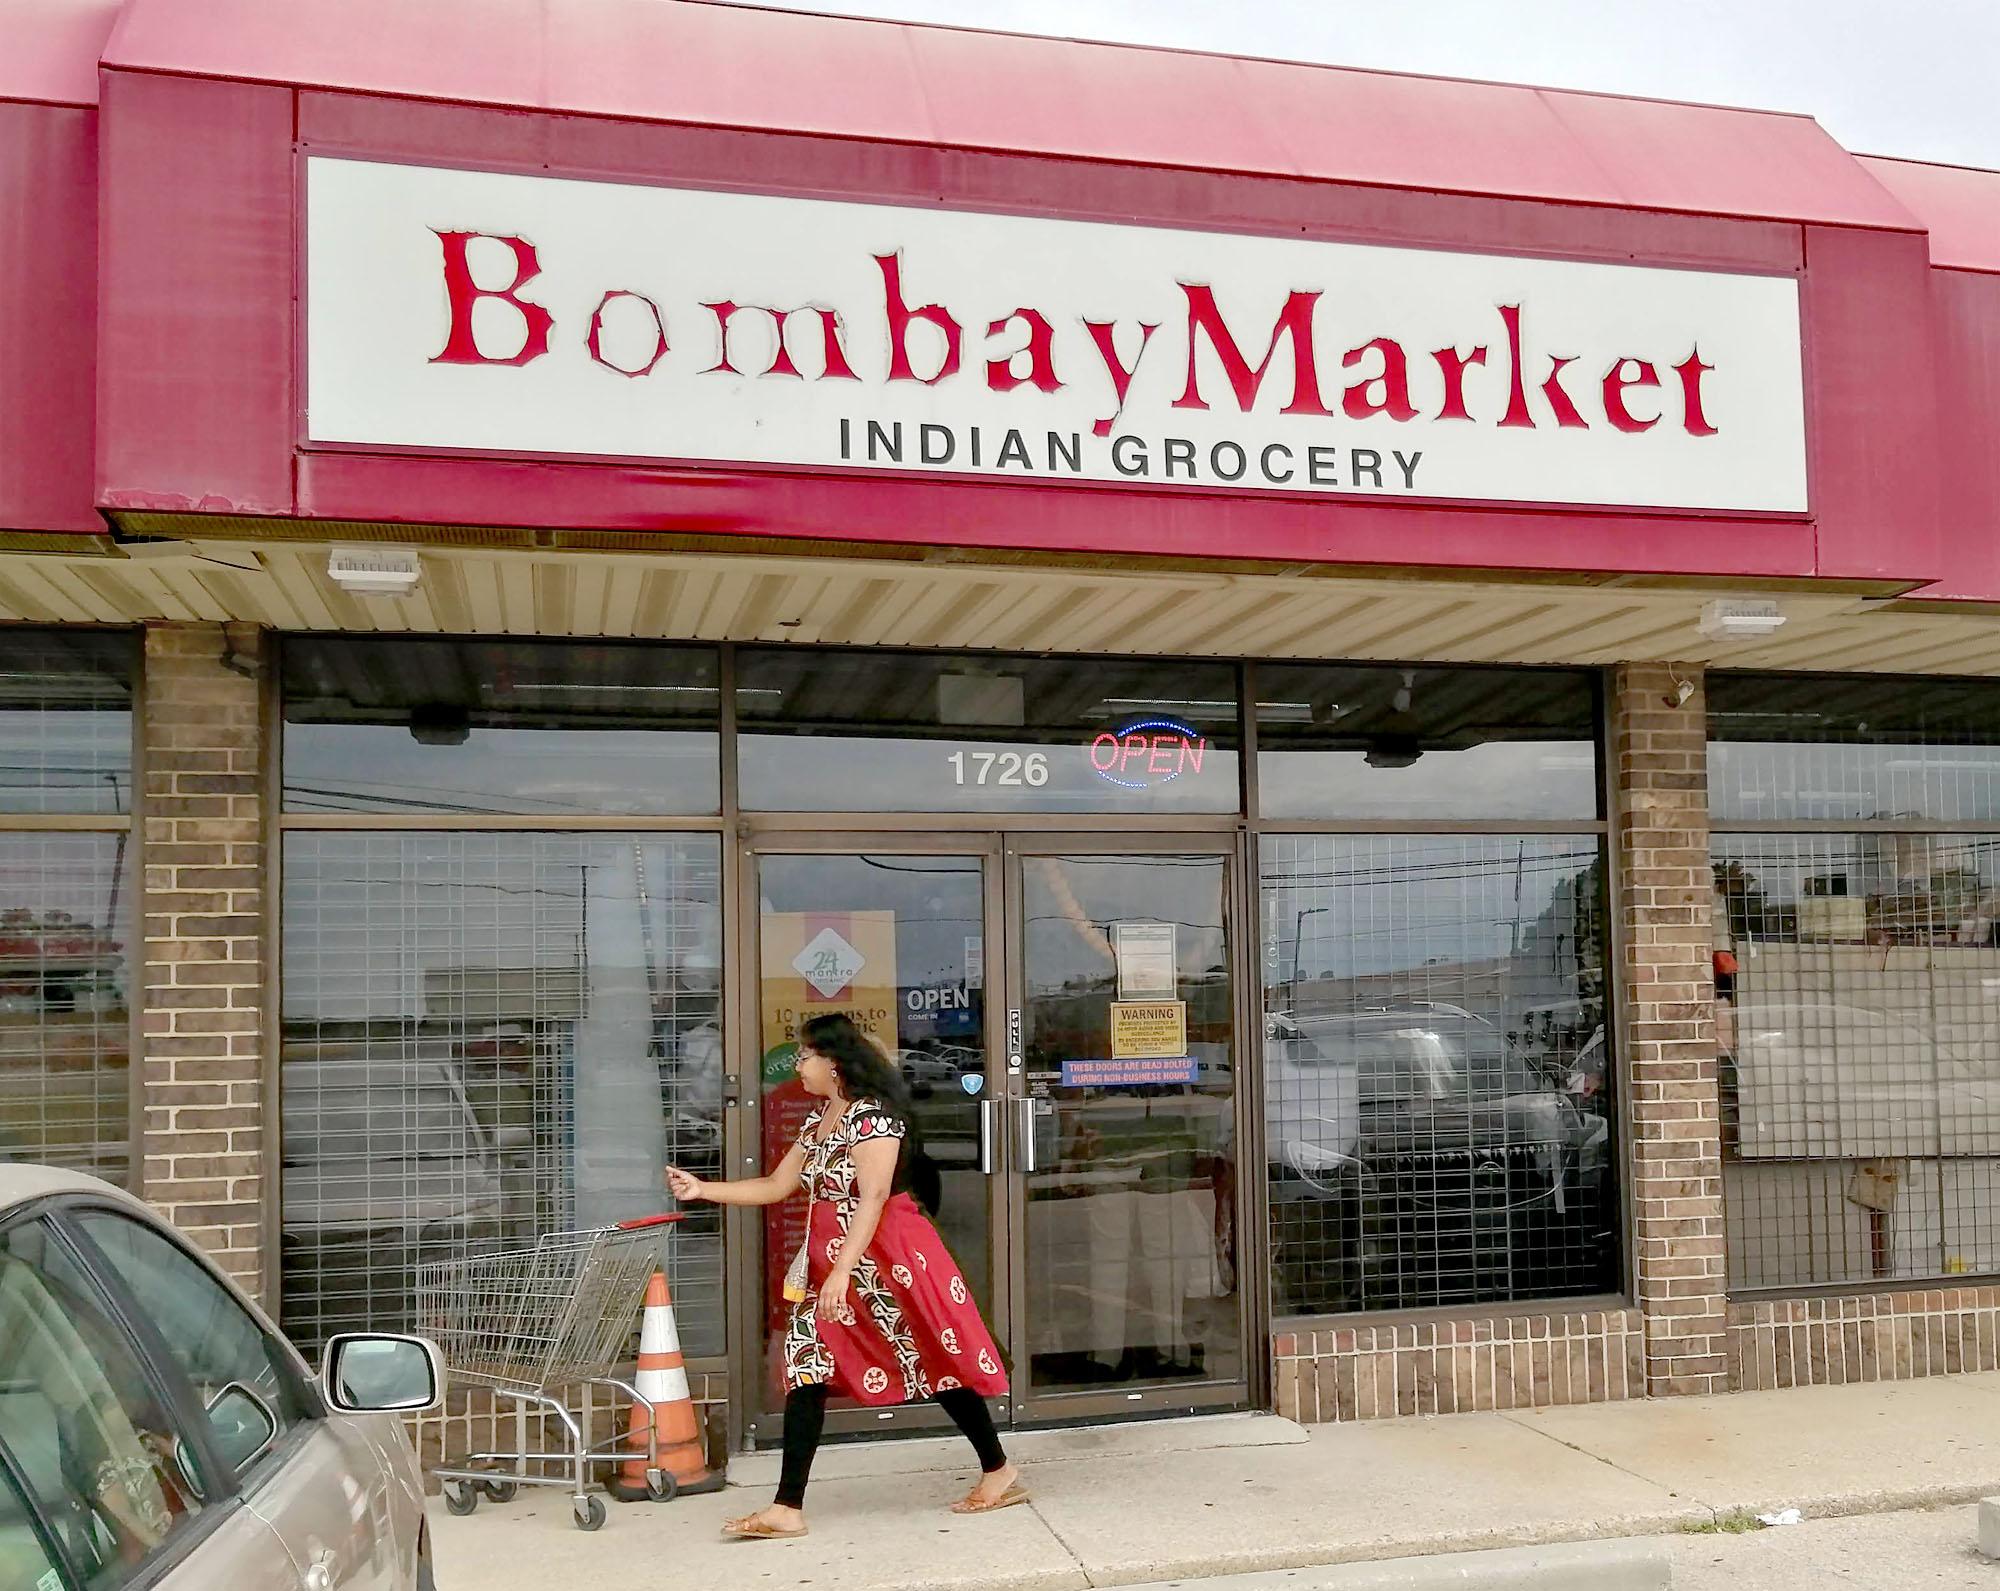 A storefront in a stripmall with a shopper walking by; a sign prominently displays â€œBombay Market Indian Grocery.â€ Photo by Paul Young.